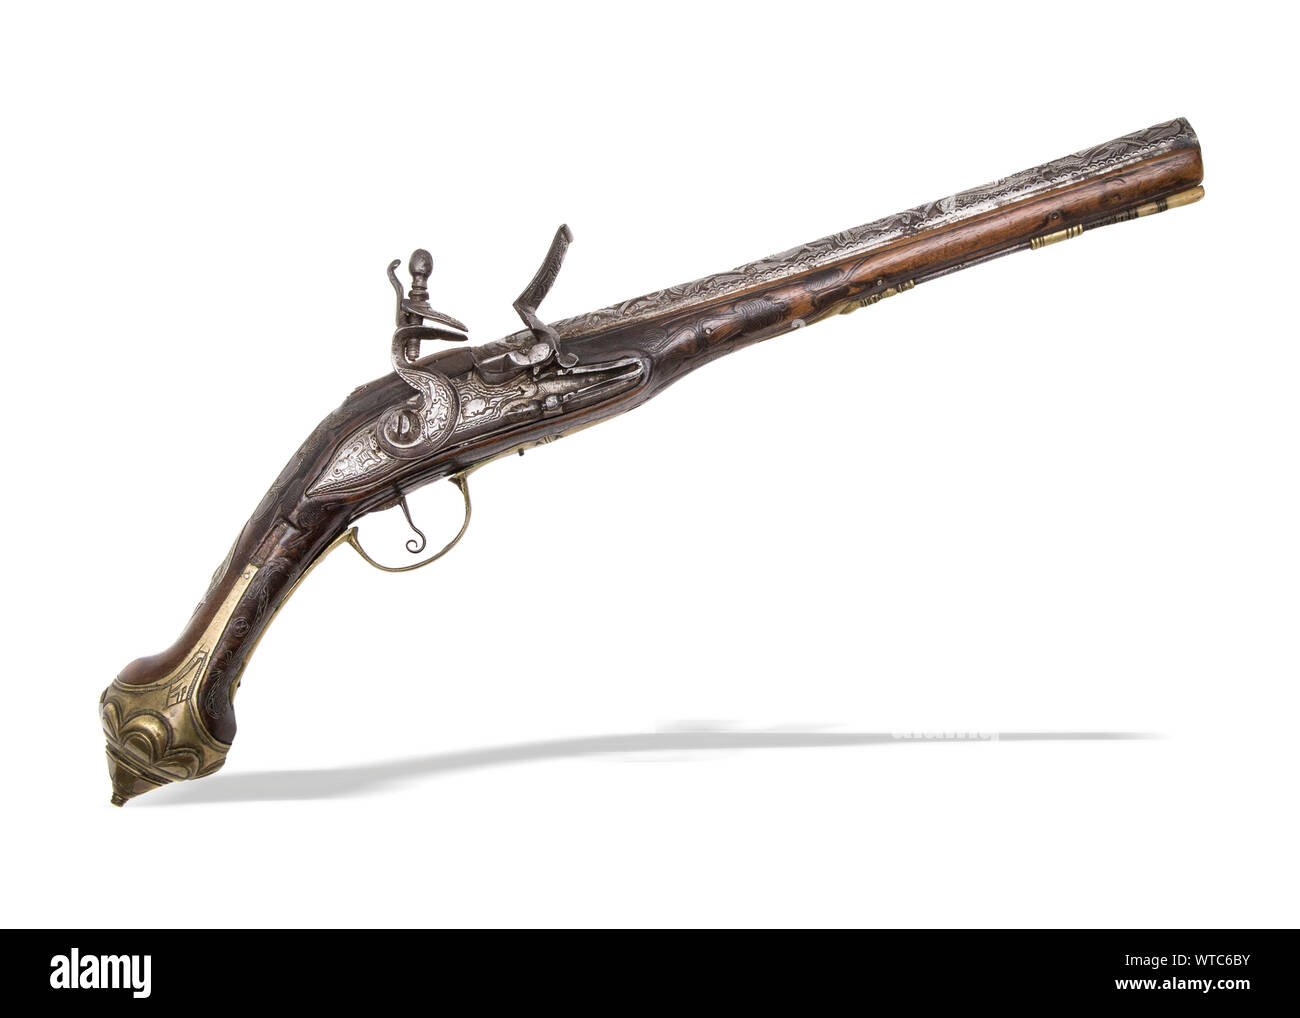 Middle Eastern engraved flinlock pistol of the 19th century. Stock Photo